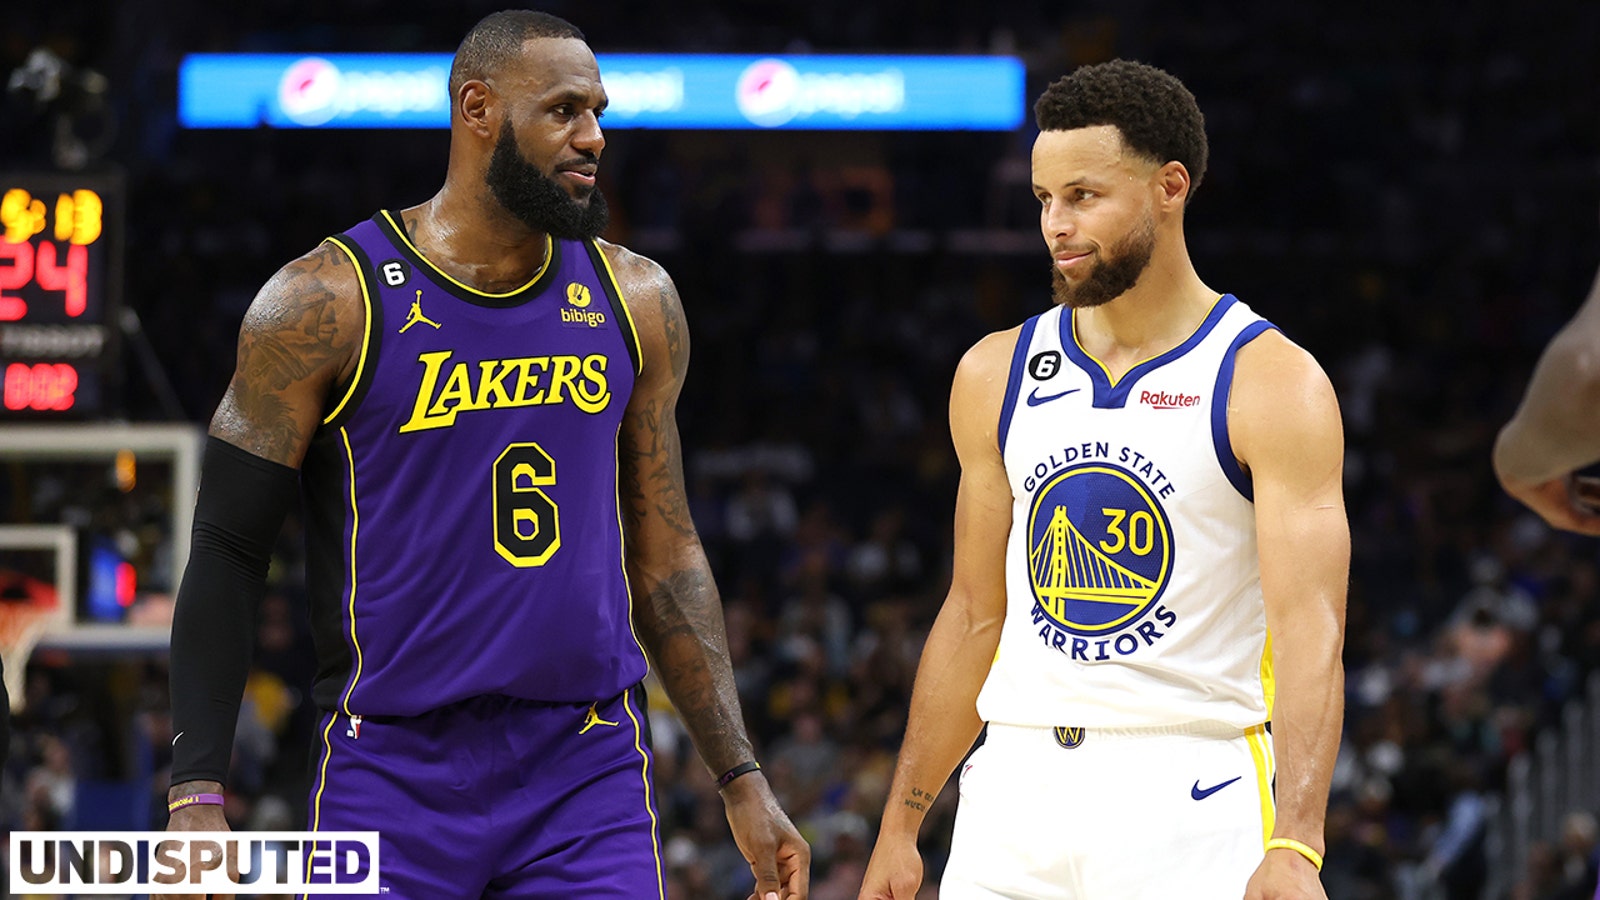 Report: LeBron James recruiting Steph Curry for 2024 Olympics in Paris